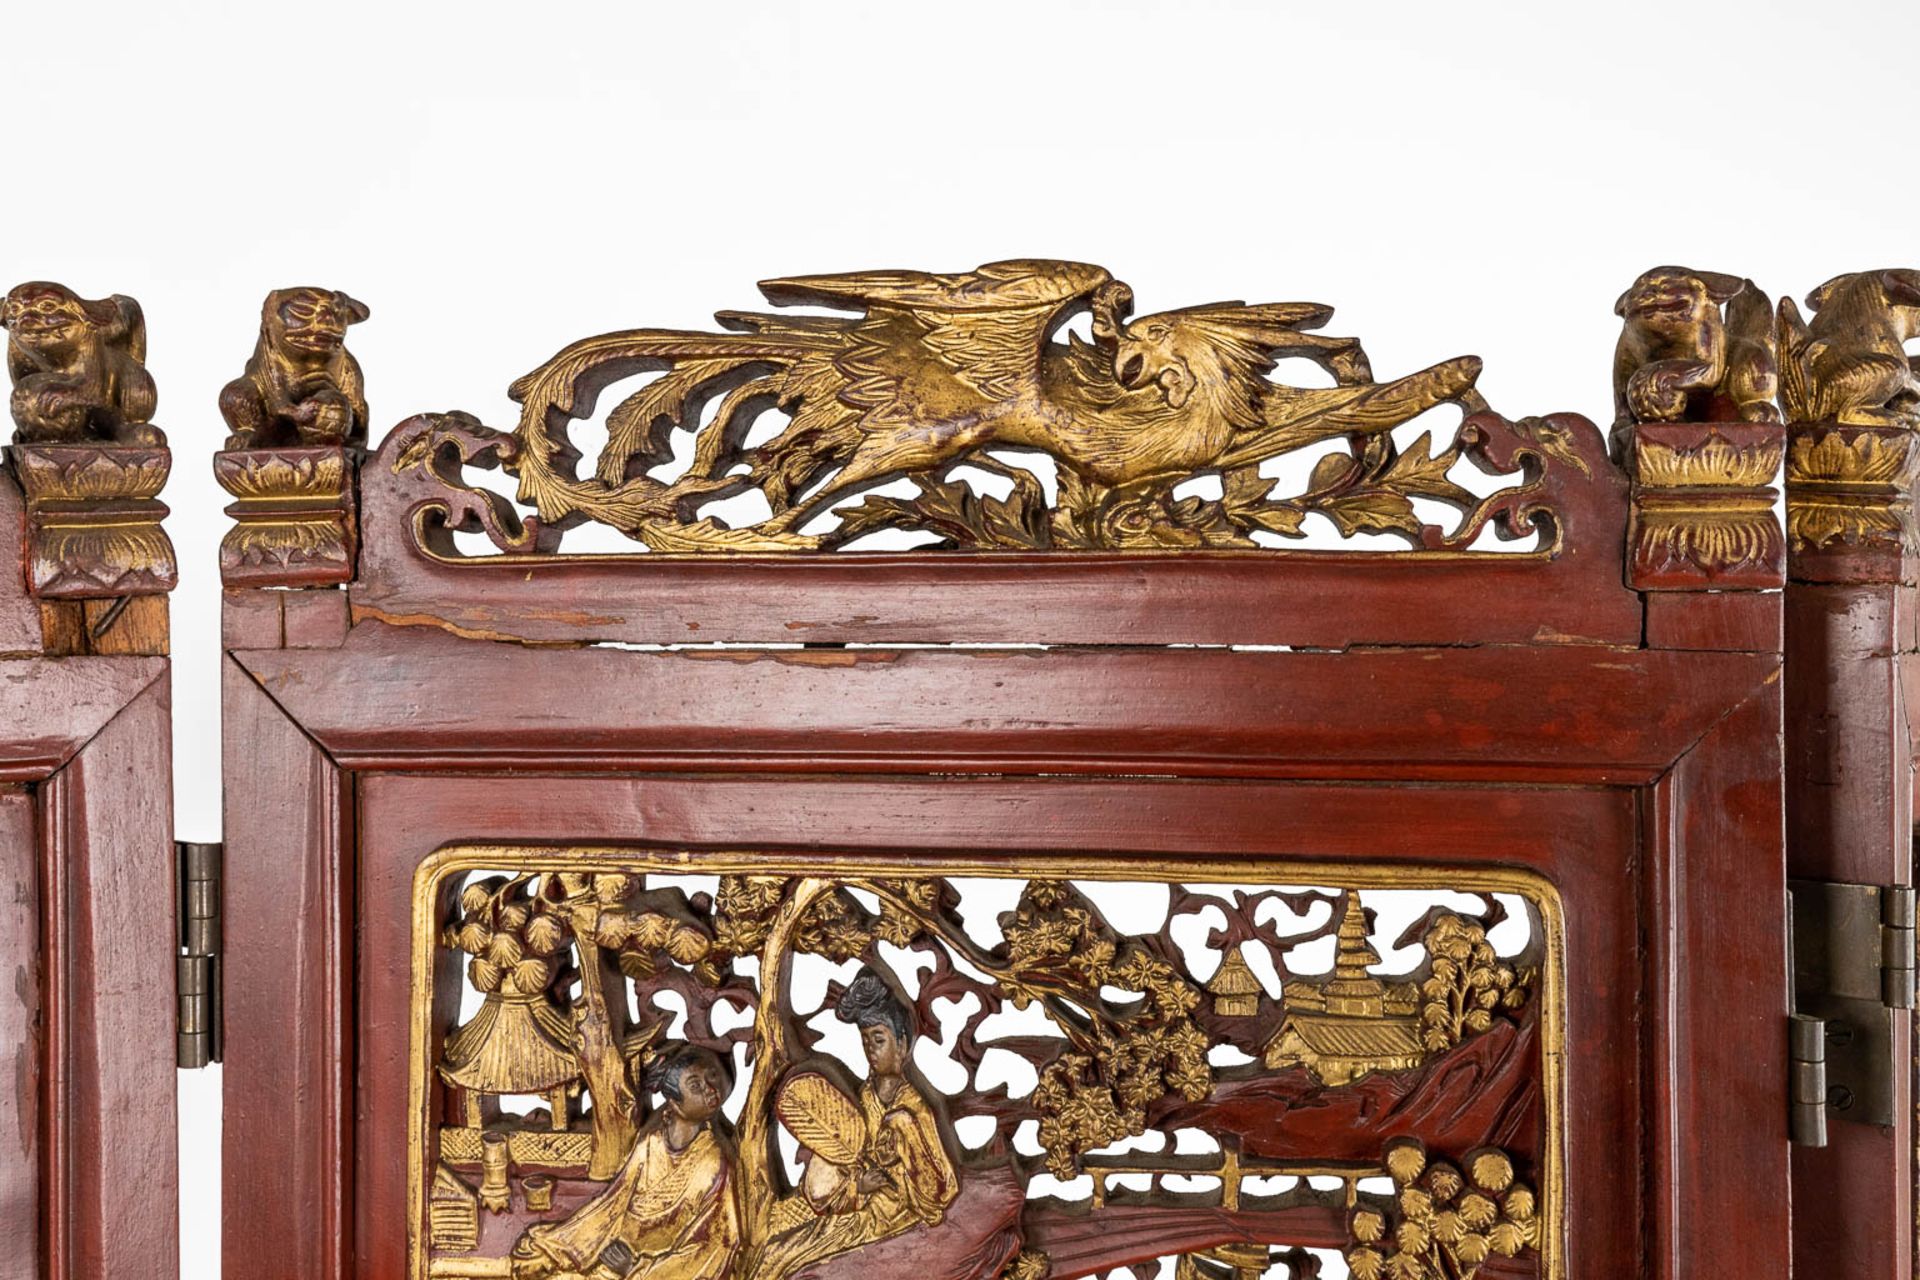 A 4-piece Chinese room divider, sculptured hardwood panels, circa 1900. (W:162 x H:185 cm) - Image 8 of 12